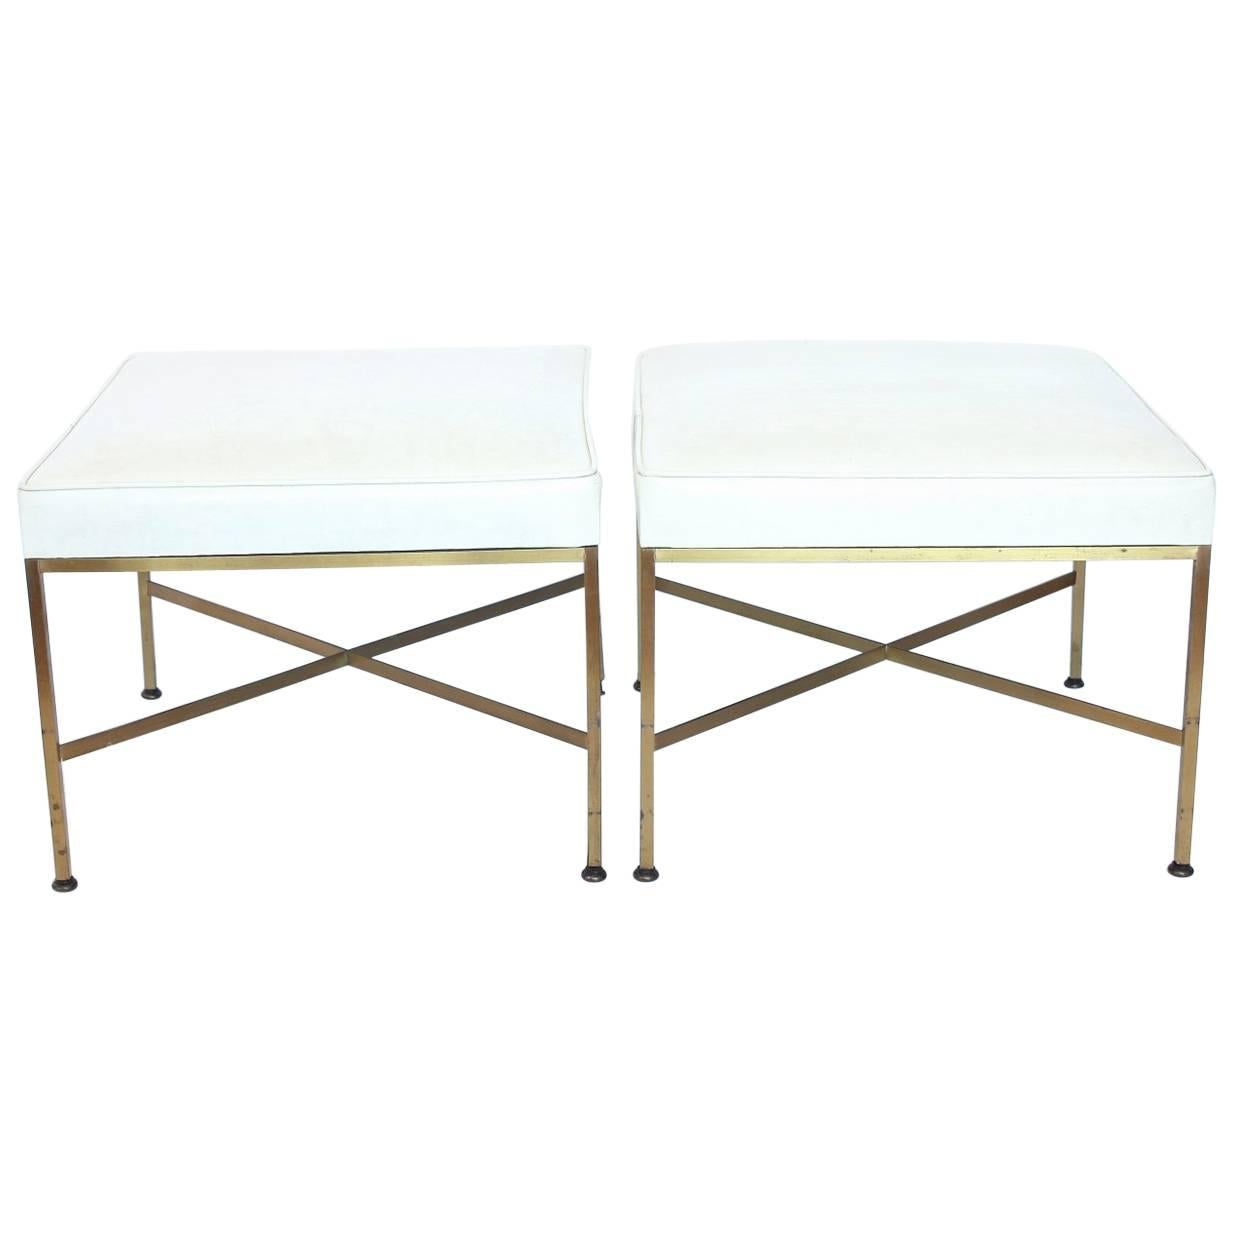 Pair of X-Base Brass and Leather Stools/Benches by Paul McCobb